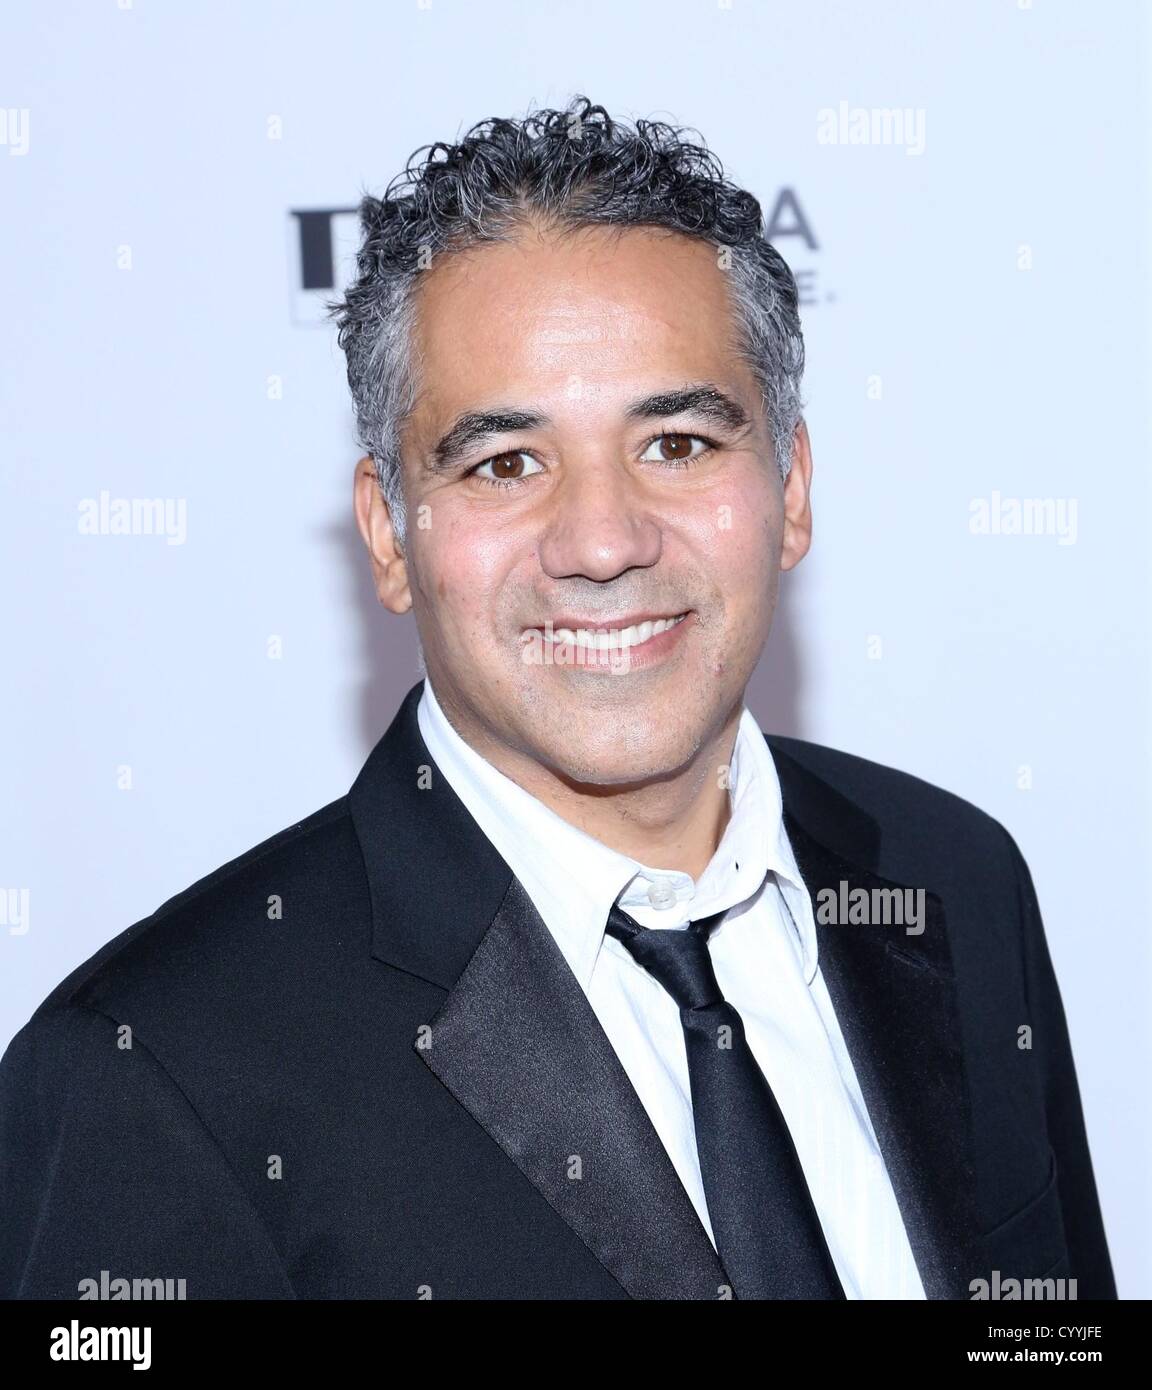 John Ortiz at arrivals for SILVER LININGS PLAYBOOK Premiere, The Ziegfeld Theatre, New York, NY November 12, 2012. Photo By: Andres Otero/Everett Collection/Alamy live news. USA. Stock Photo